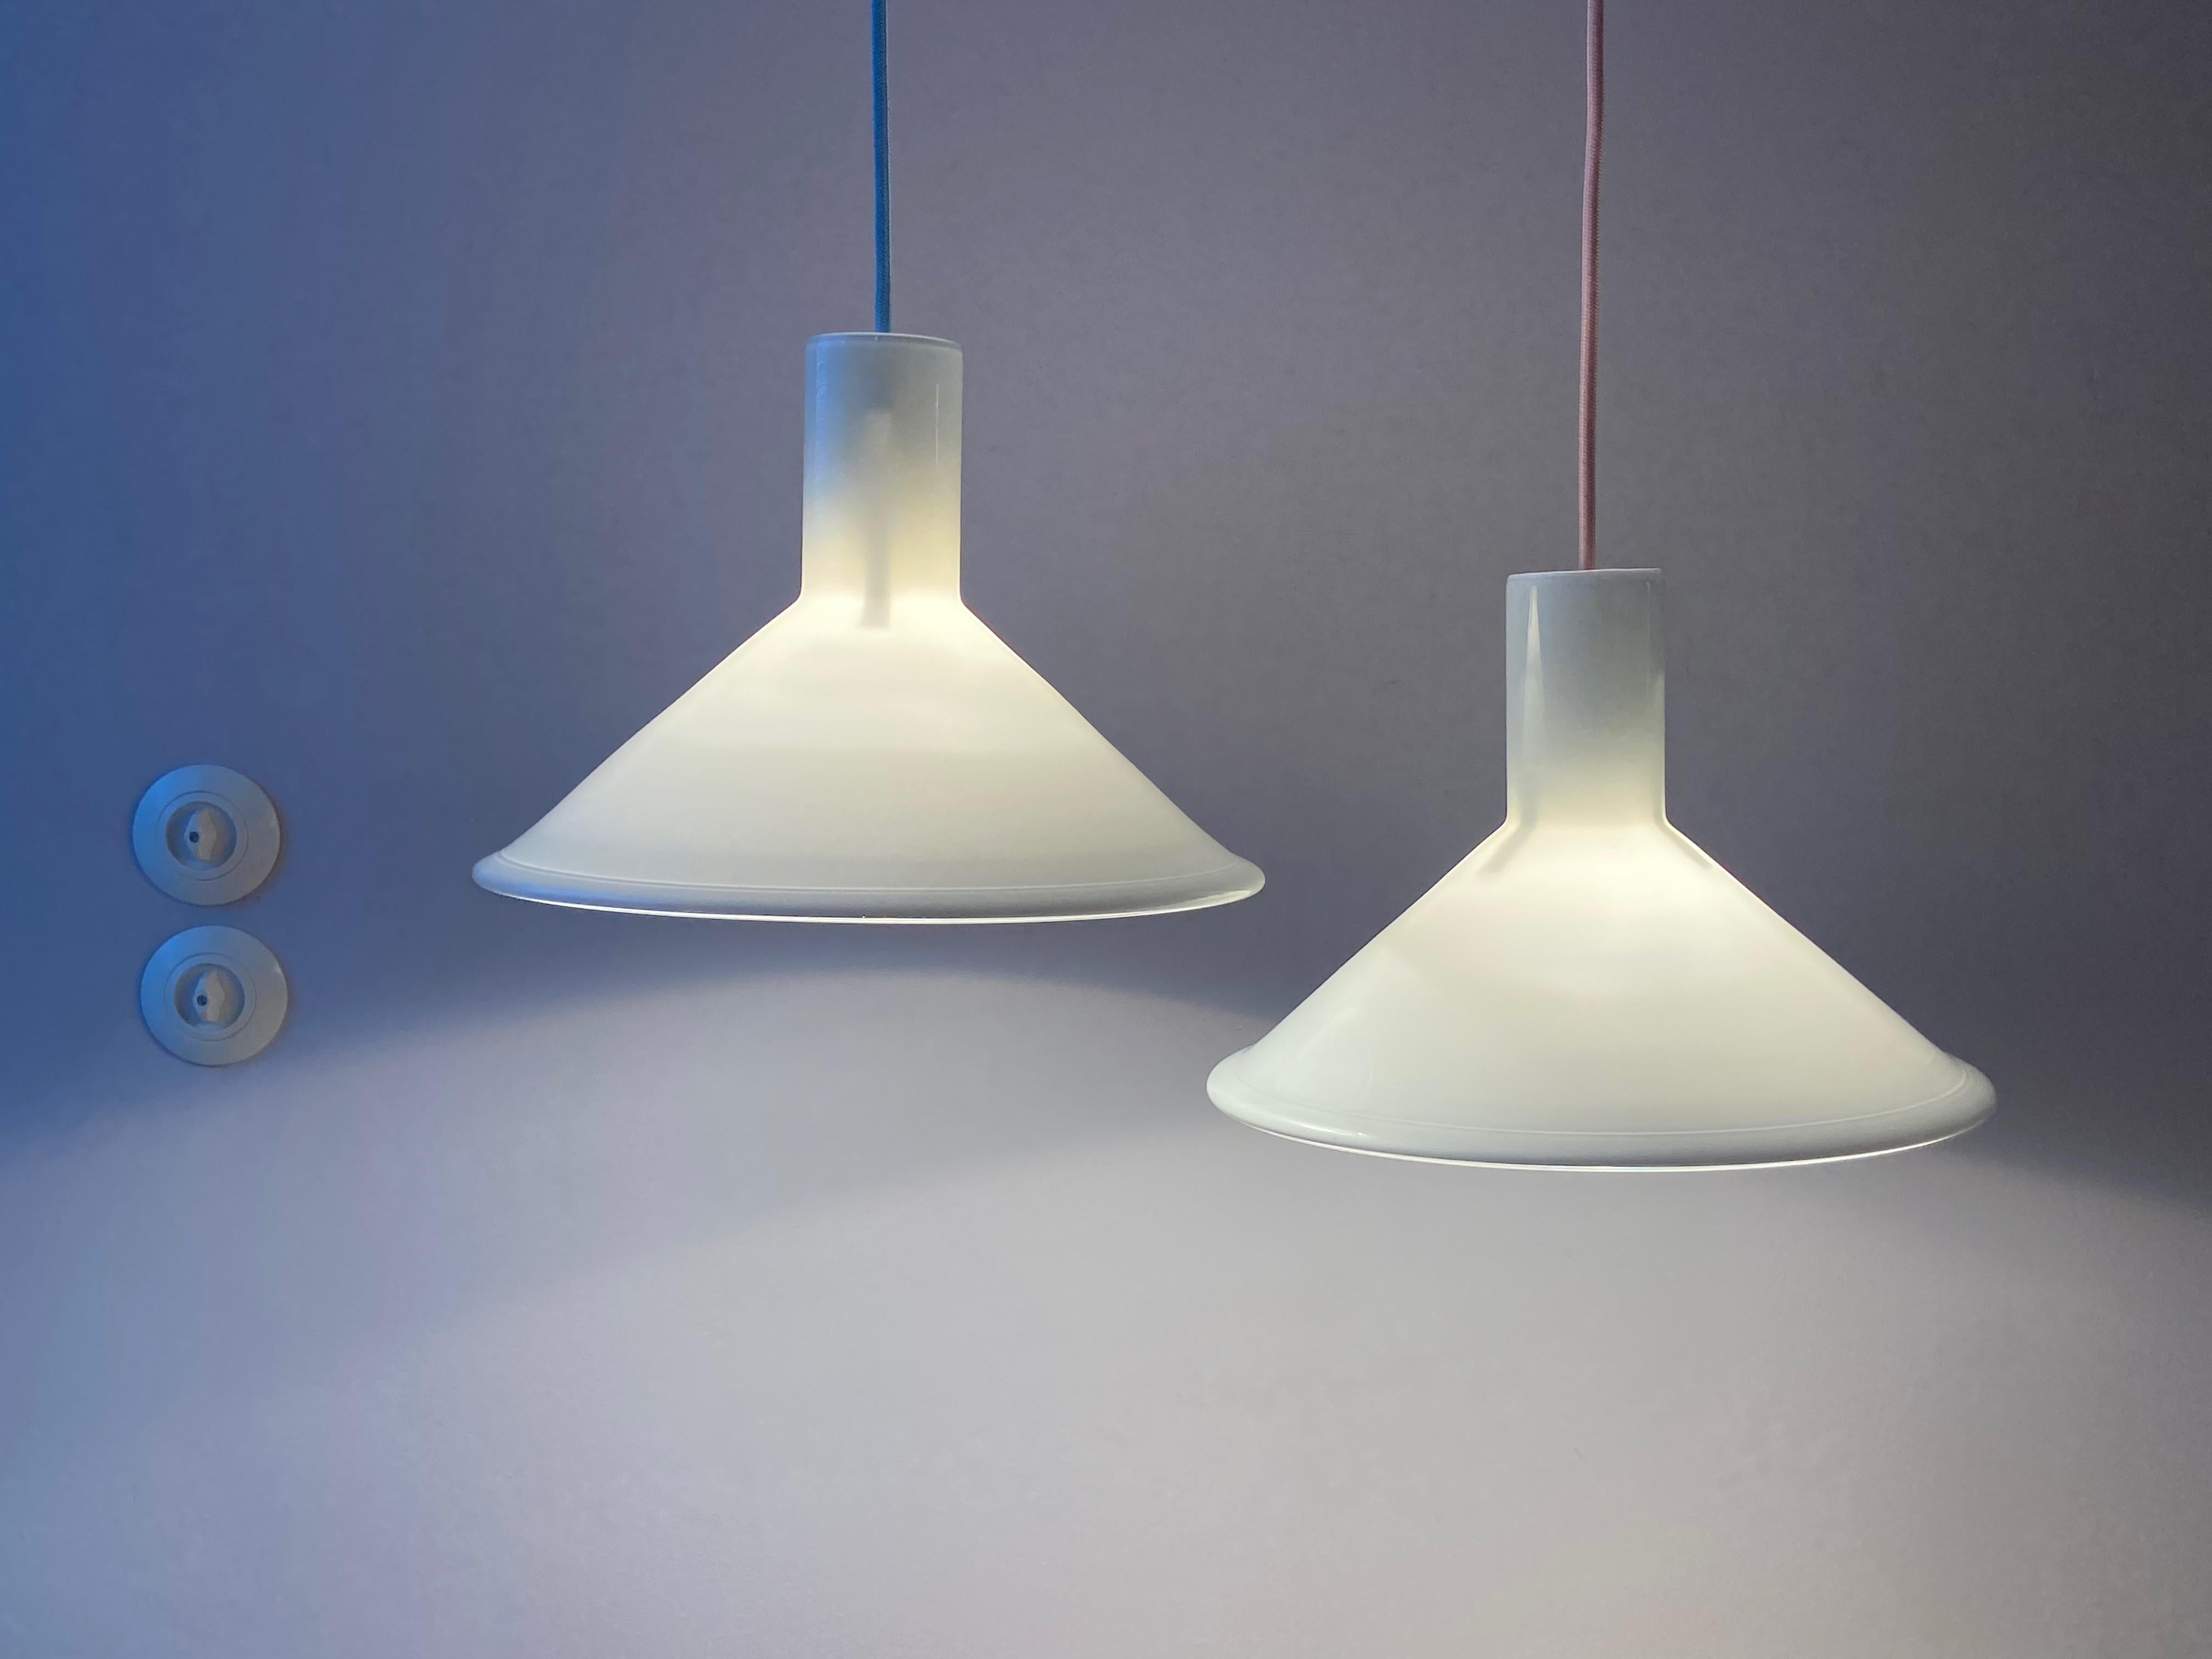 1x P&T pendant lamp designed by Michael Bang for Holmegaard in the 1970s. This Danish lamp is made of opaline glass and is white on the outside and white on the inside. The lamp is in very good condition, no damages and comes with neon yellow fabric